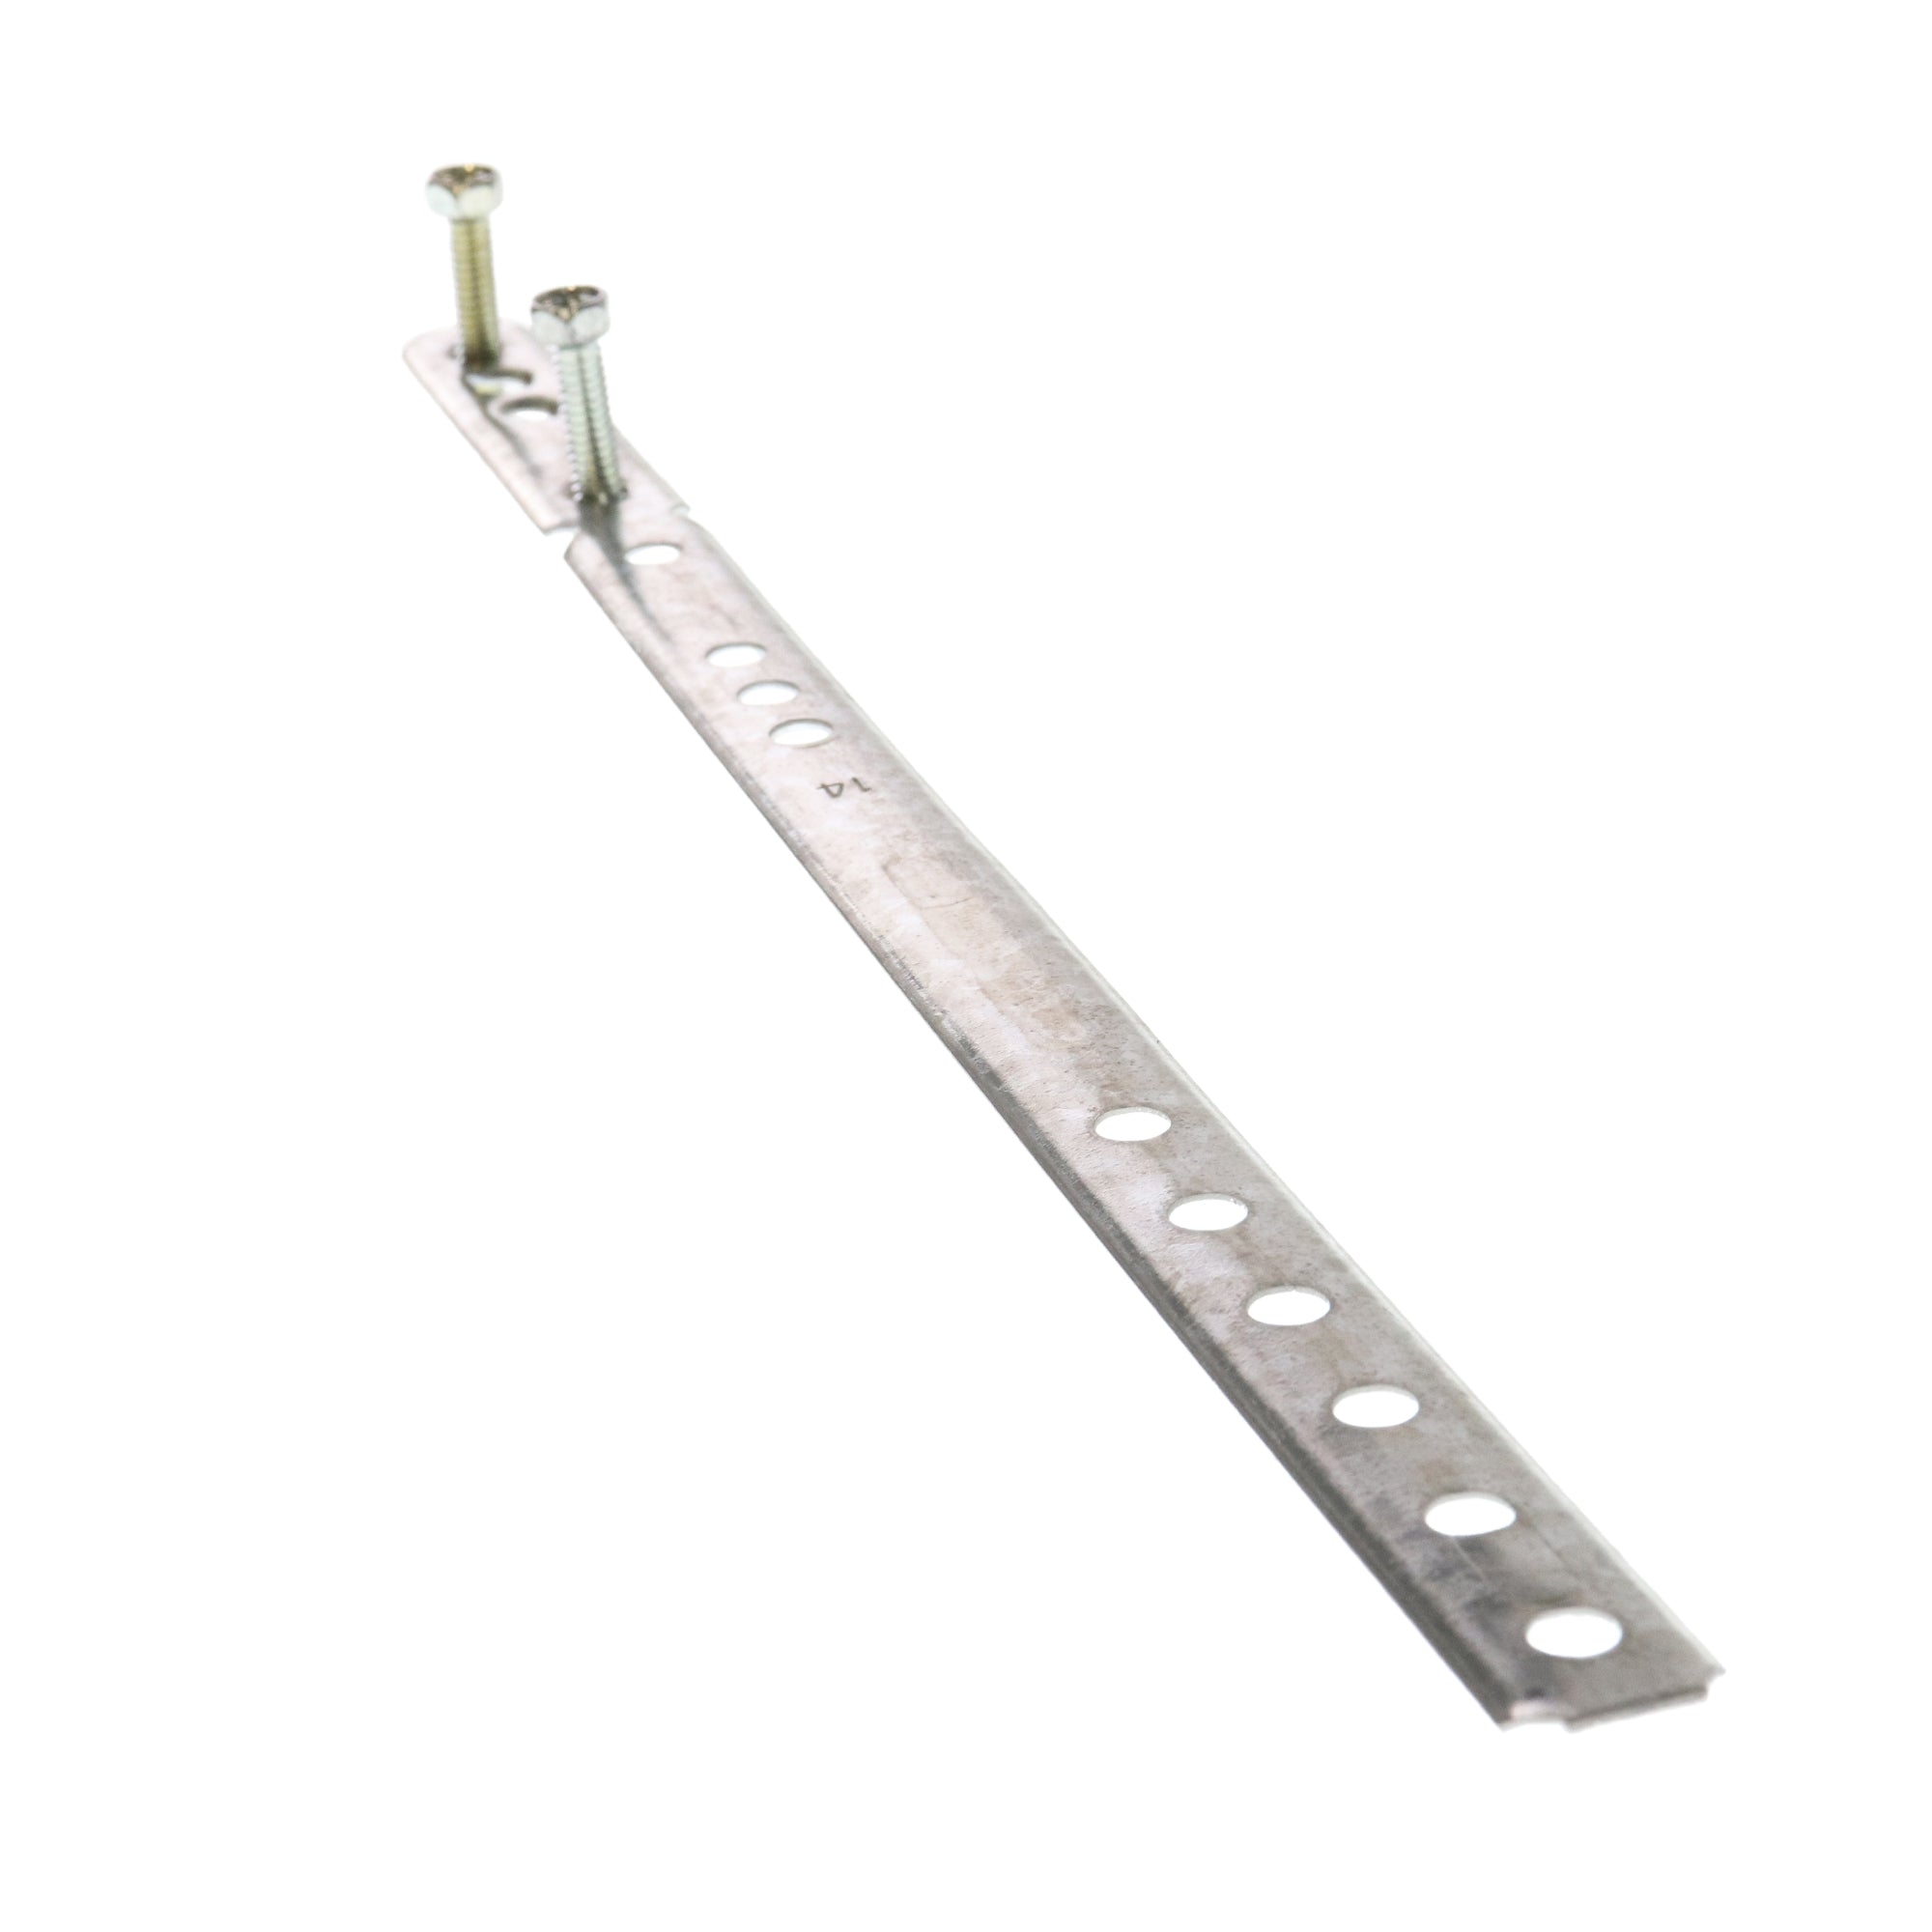 Erico Caddy Cadwal, CADDY ERICO LCSB12 LATHERS CHANNEL SUPPORT BRACKET, 3/4" - 2", (50-PACK)